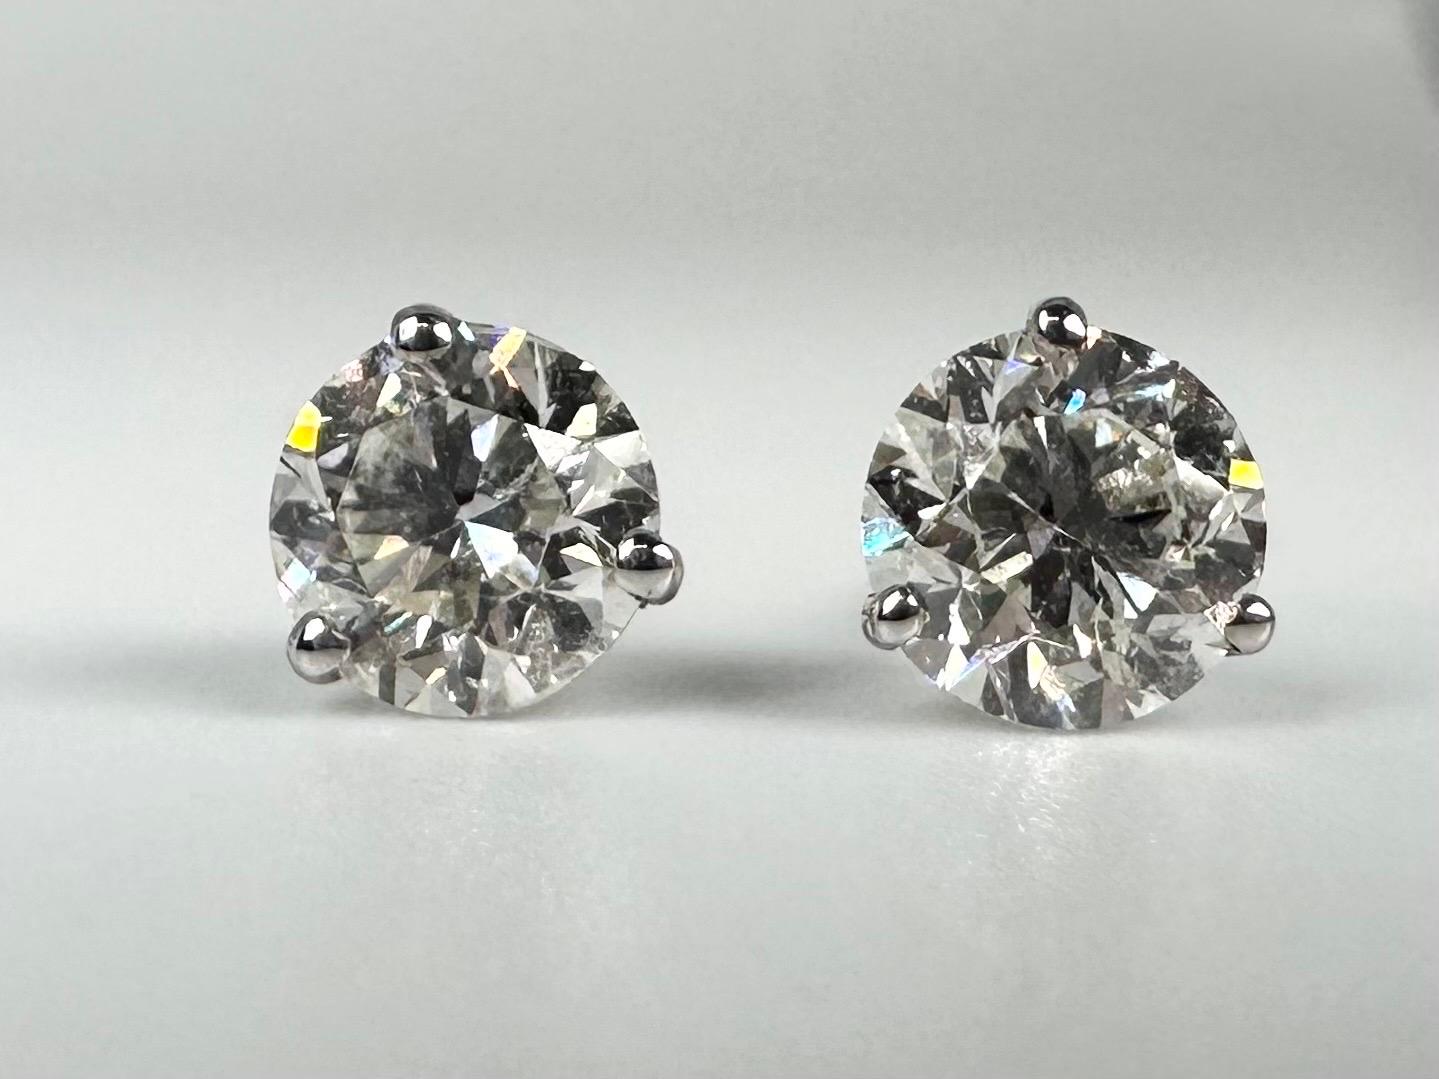 A pair of diamond stud earrings in 14KT white gold, martini 3 claw setting looks stunning and unusual when on ears.

GOLD: 14KT gold
NATURAL DIAMOND(S)
Clarity/Color: SI/F-G
Carat:1.98ct
Cut:Round Brilliant
Grams:1.5
Item: 15000034krfm

WHAT YOU GET